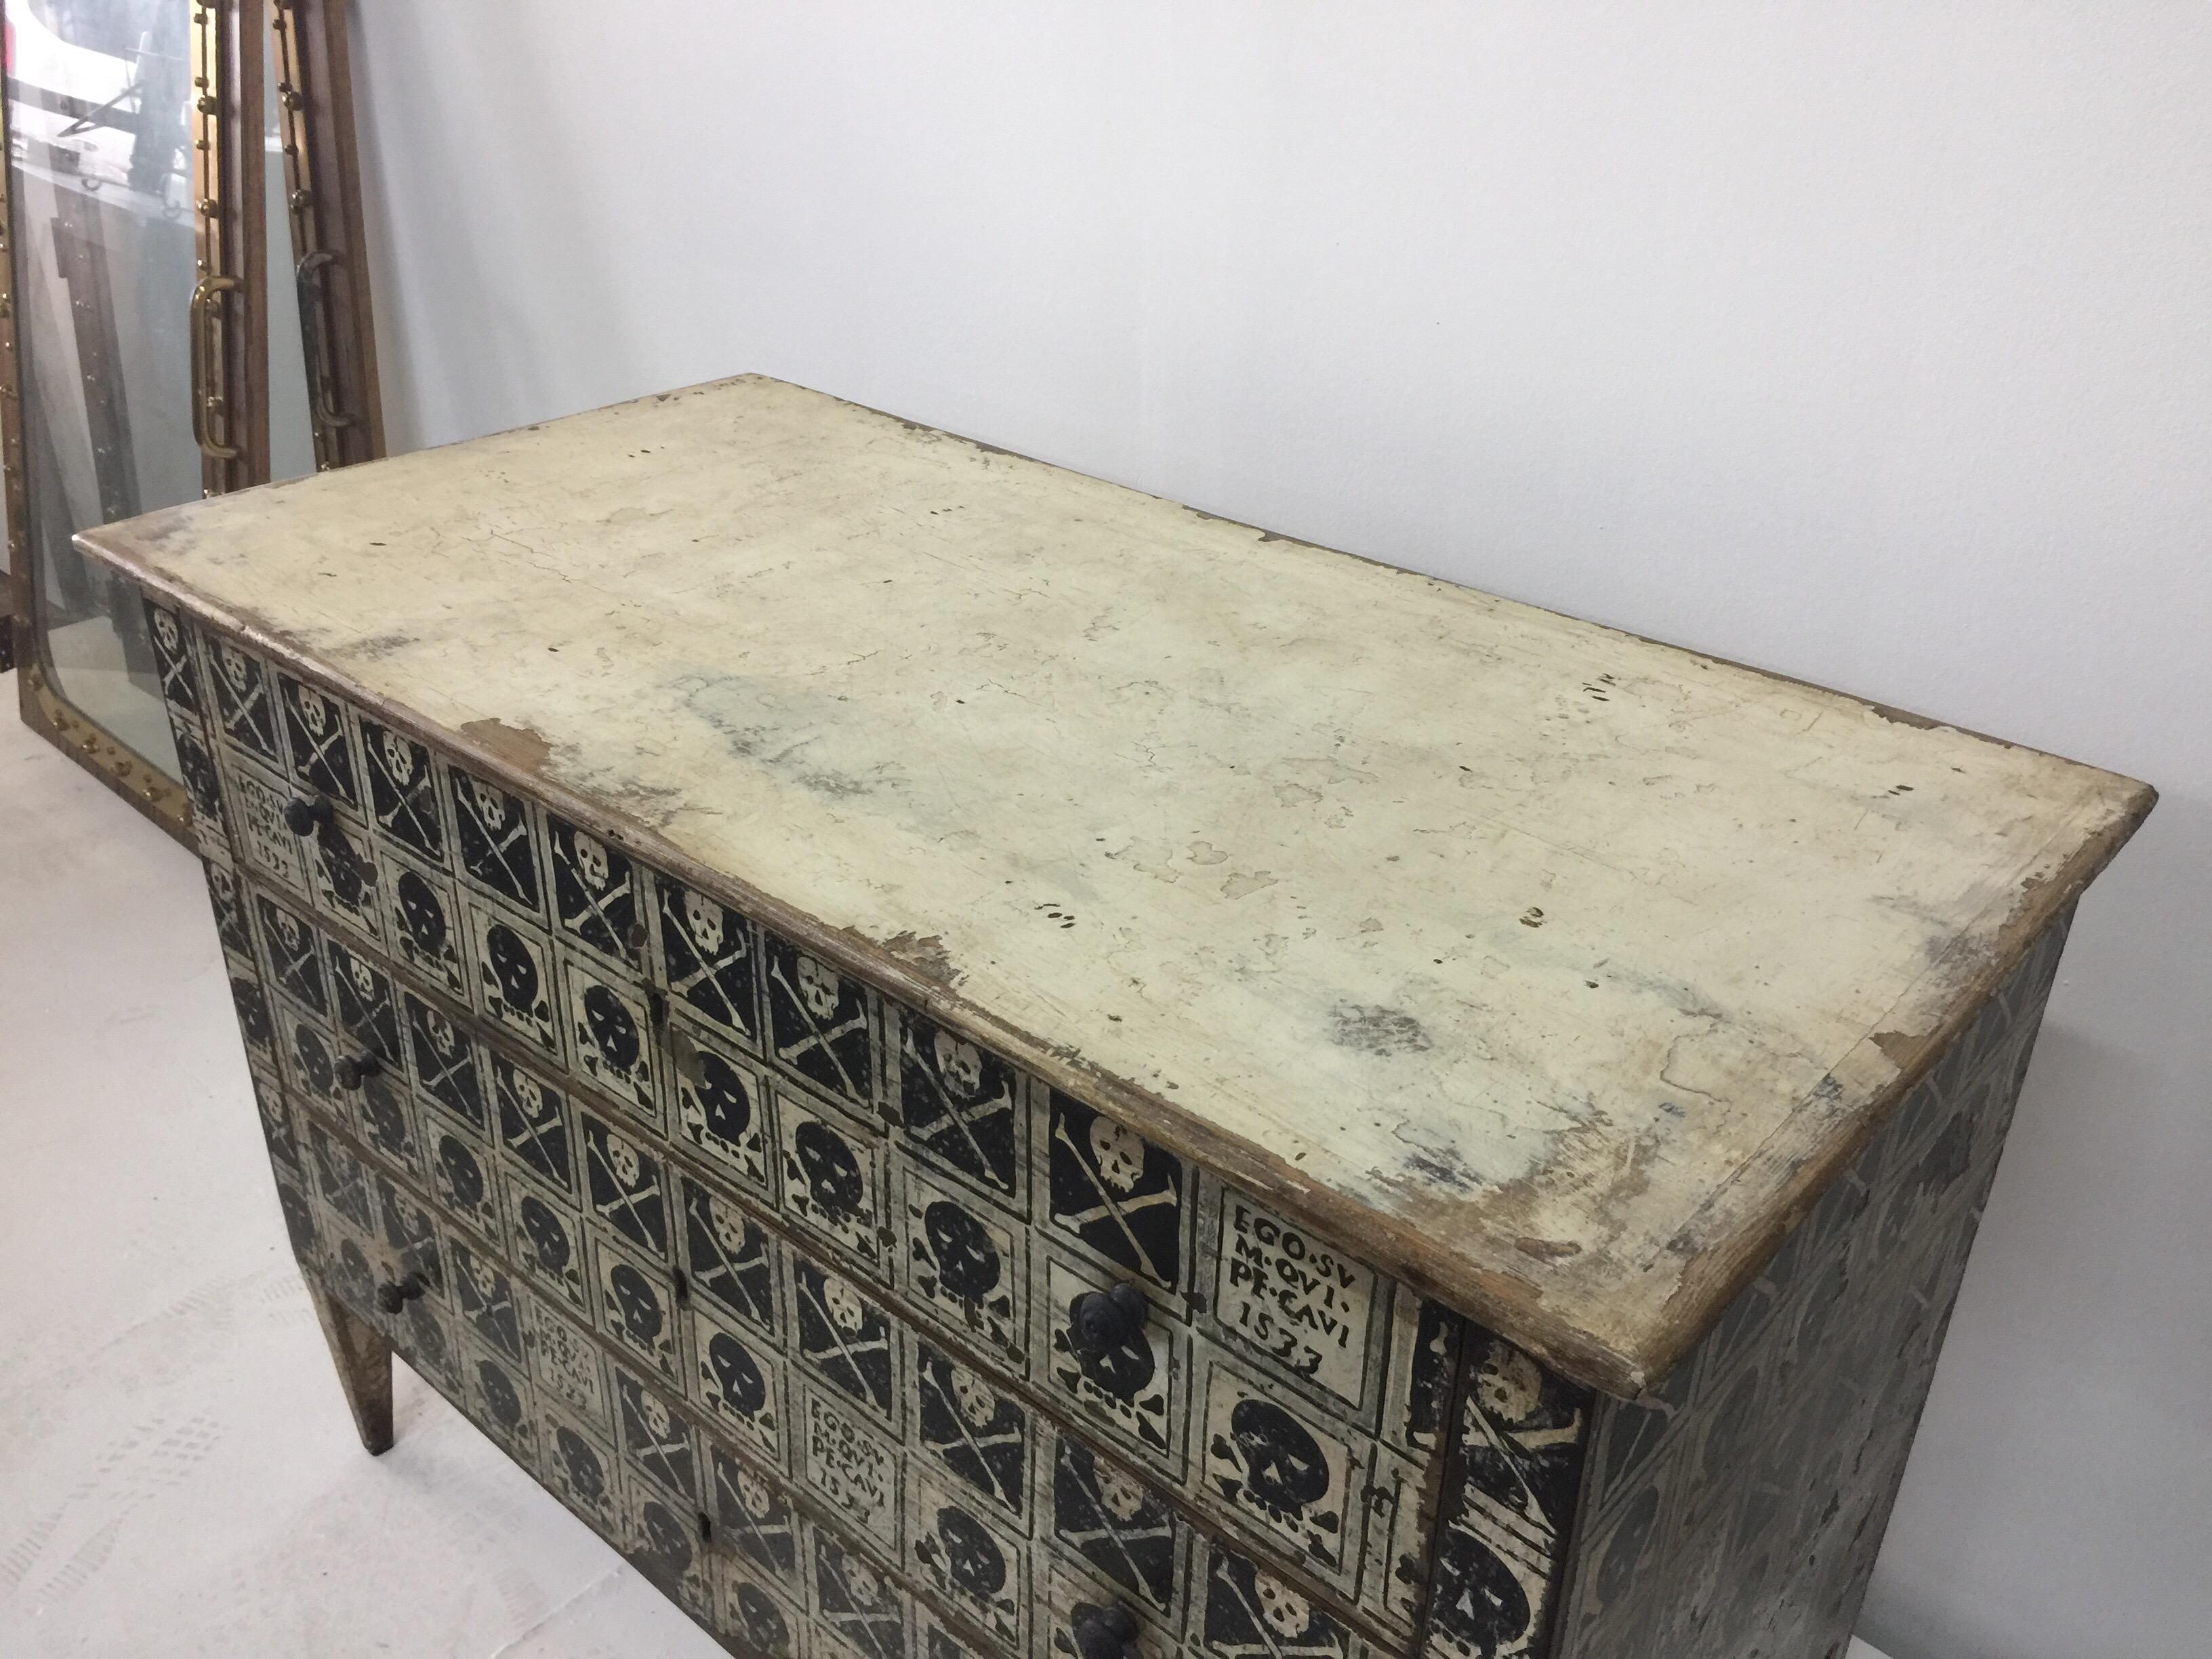 This is a truly unique Memento Mori  cabinet or chest found in Portugal. Three ample drawers and original key. It is worn and aged beautifully, very solid and reminiscent of the days of Kings, Queens, explorers and pirates.